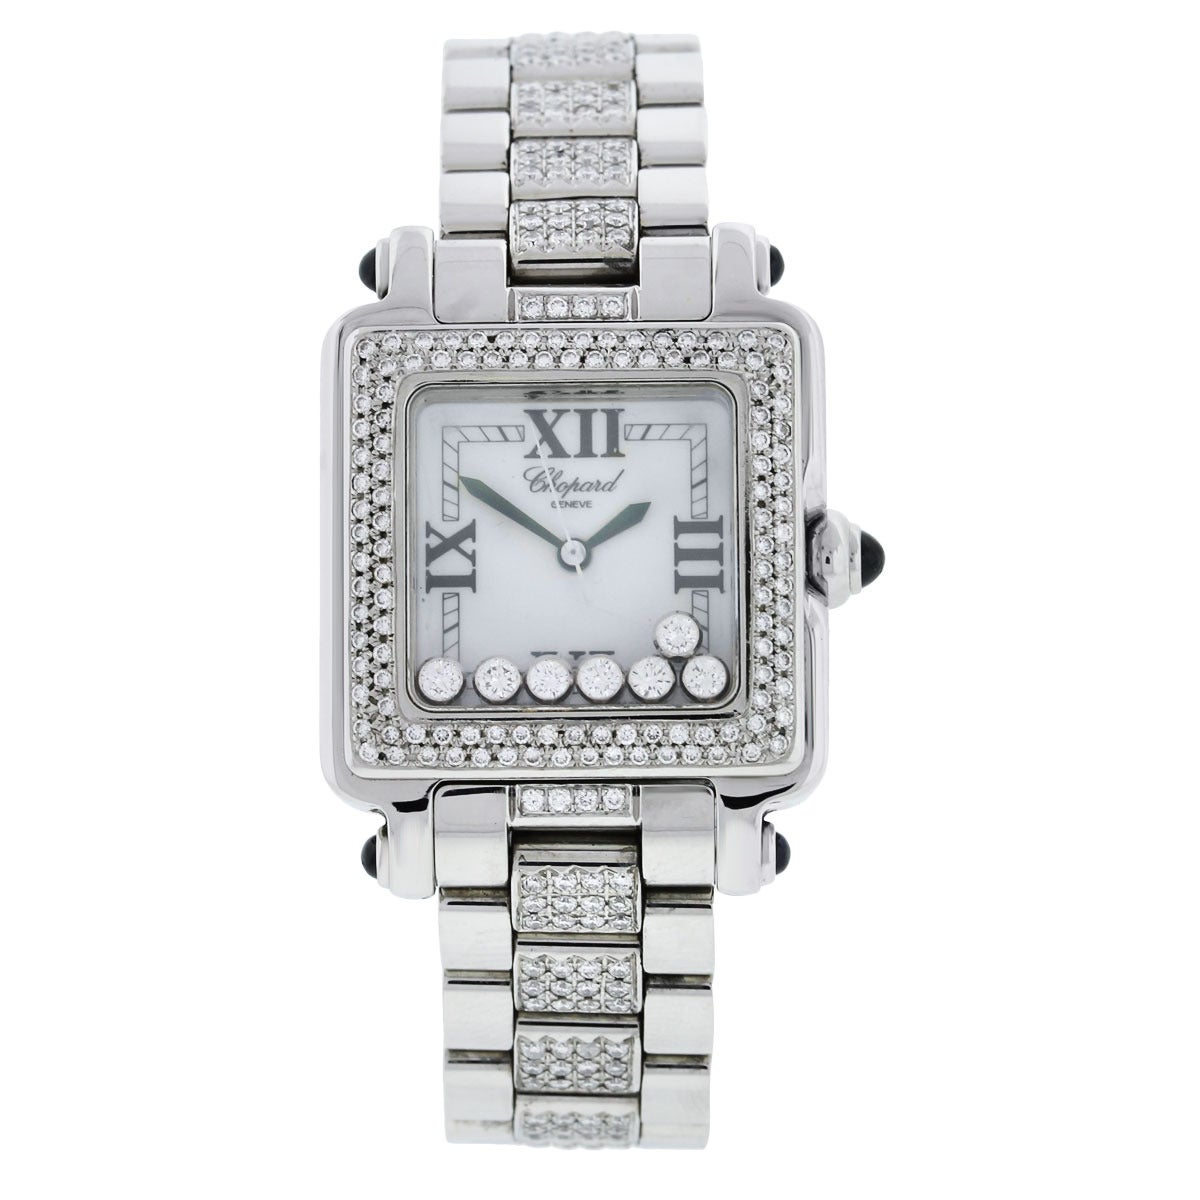 Brand: Chopard
Model: Happy Sport
Reference: 27/8349-23
Case Material: Stainless Steel

Movement: Quartz
Case Measurement: 30mm X 27mm
Dial: White Dial with floating diamonds
Band: Stainless steel with pave diamonds (aftermarket). Diamonds